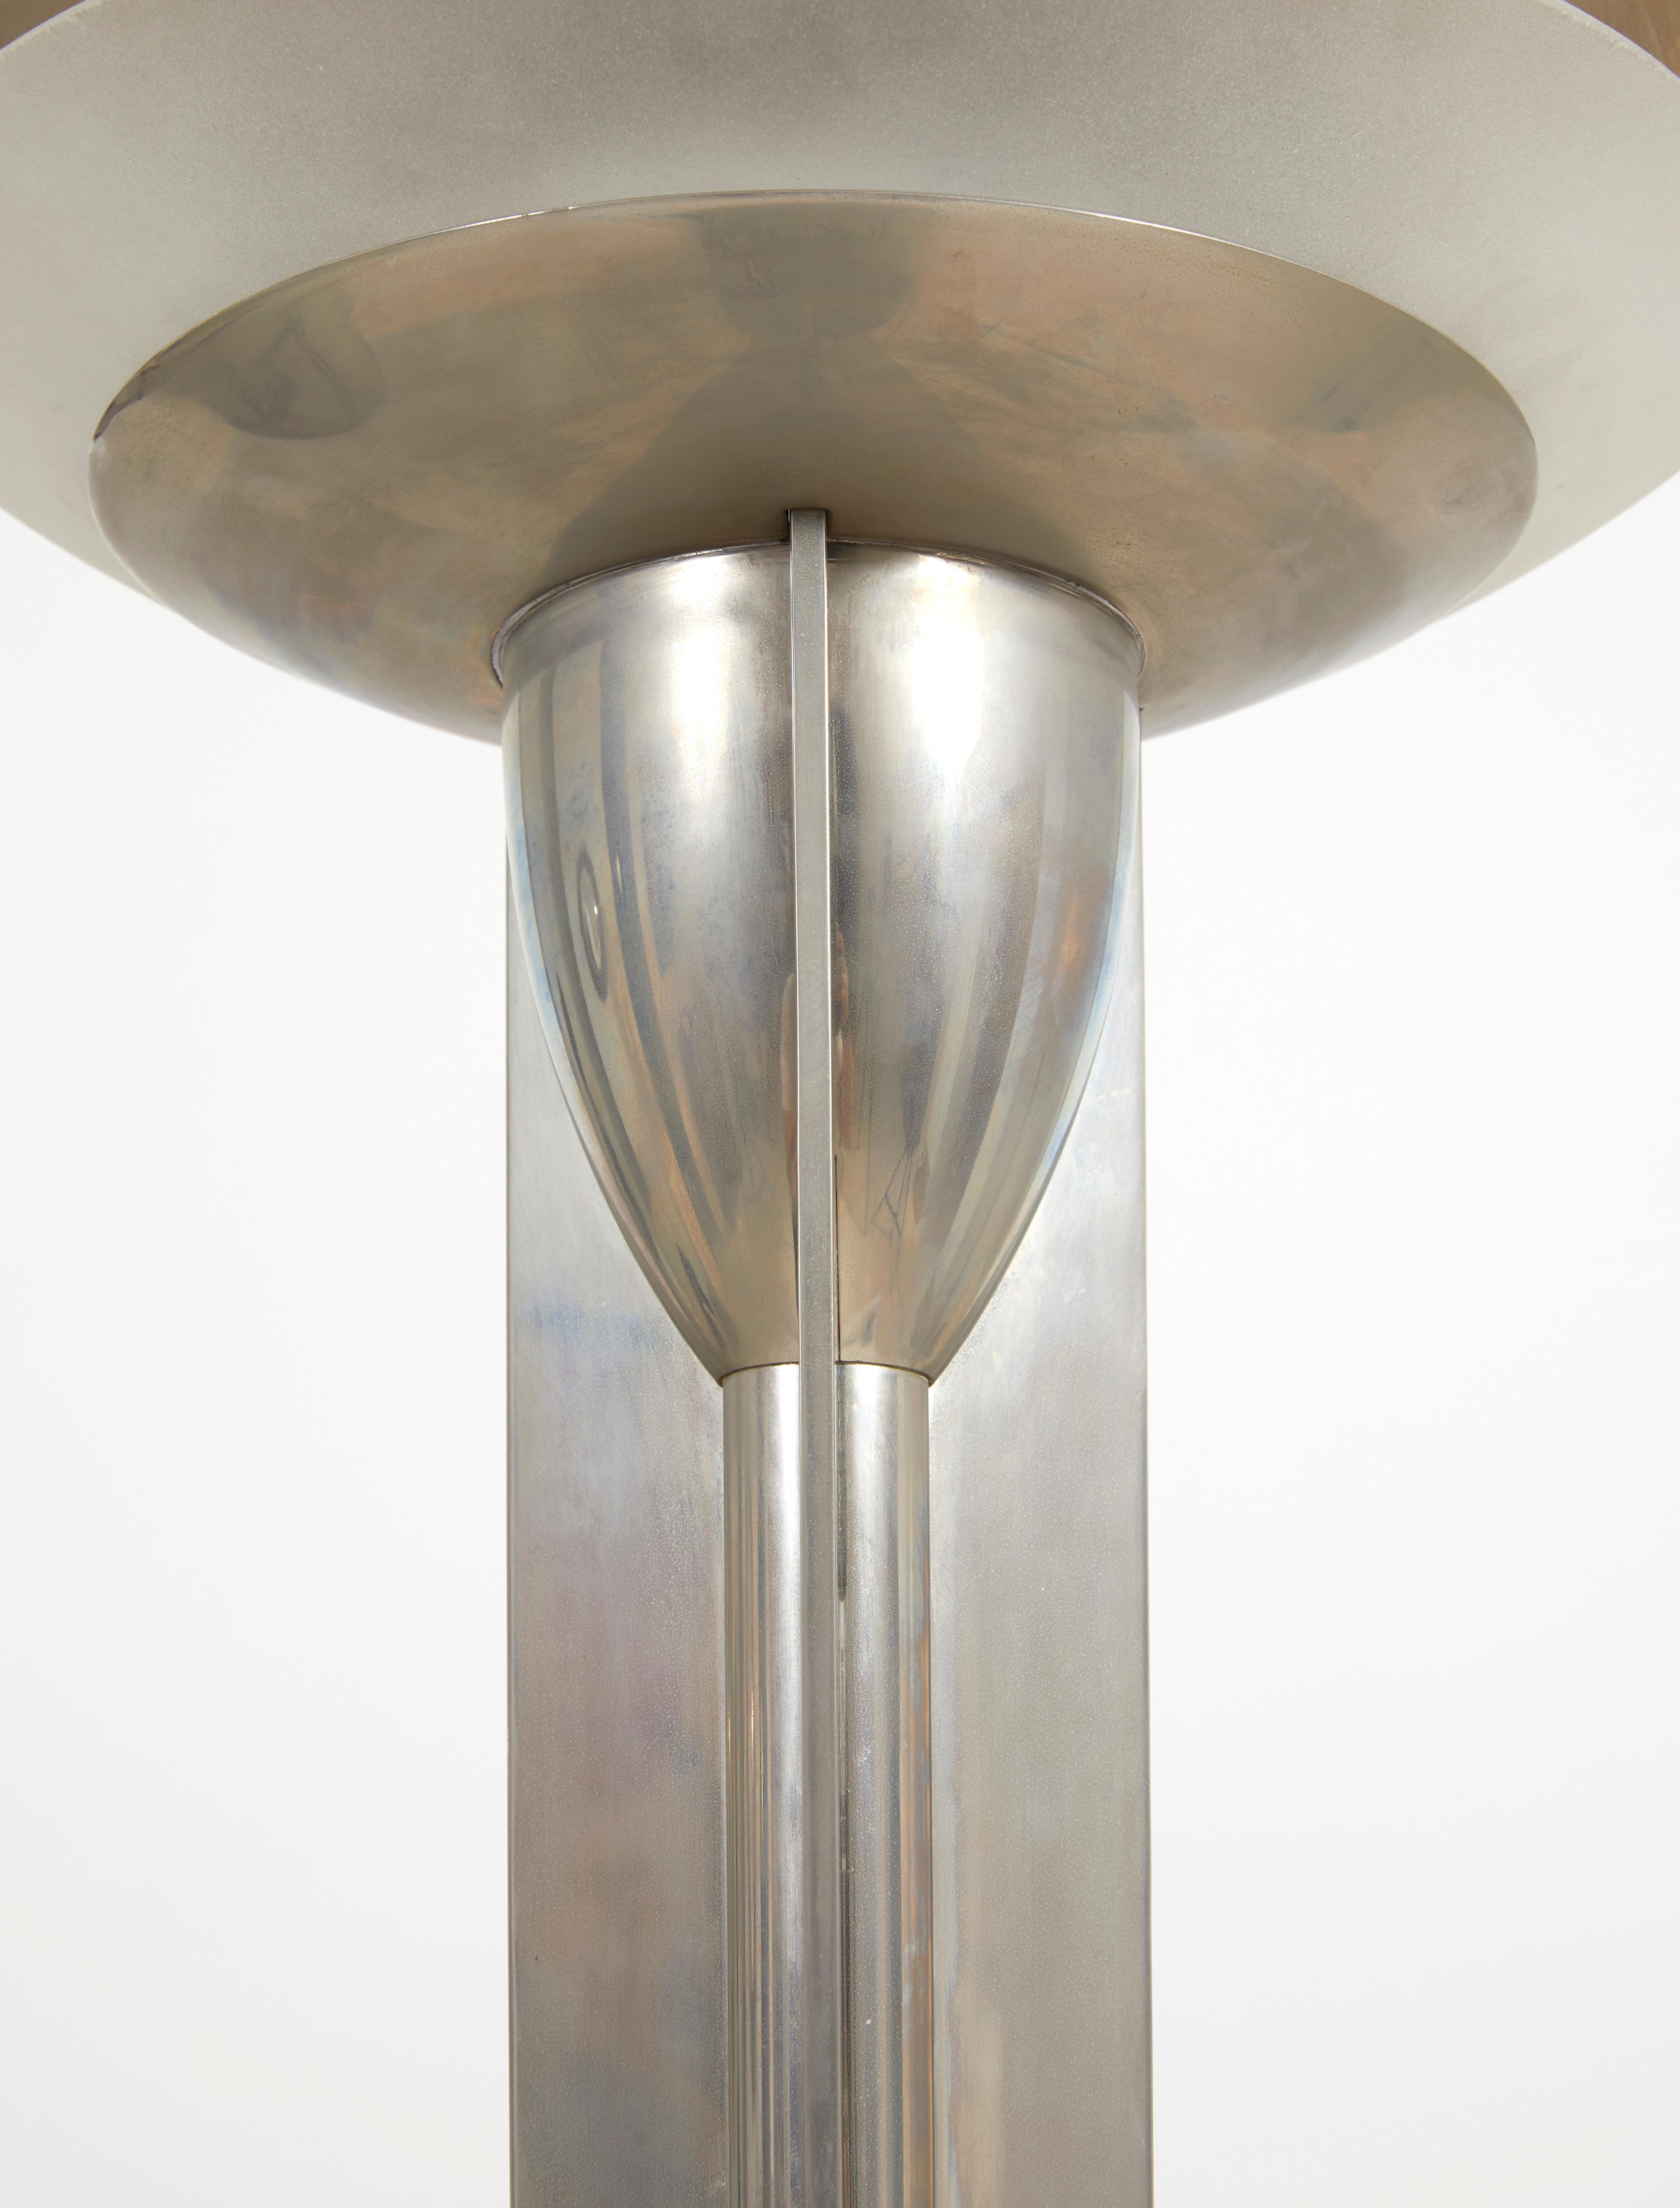 Silver nickel-plated metal floor lamp, three white opaline glass basins, circular base.

Model presented in 1932 at the 21st Salon des artistes décorateurs and purchased by the city of Paris for the 1937 Universal Exhibition.